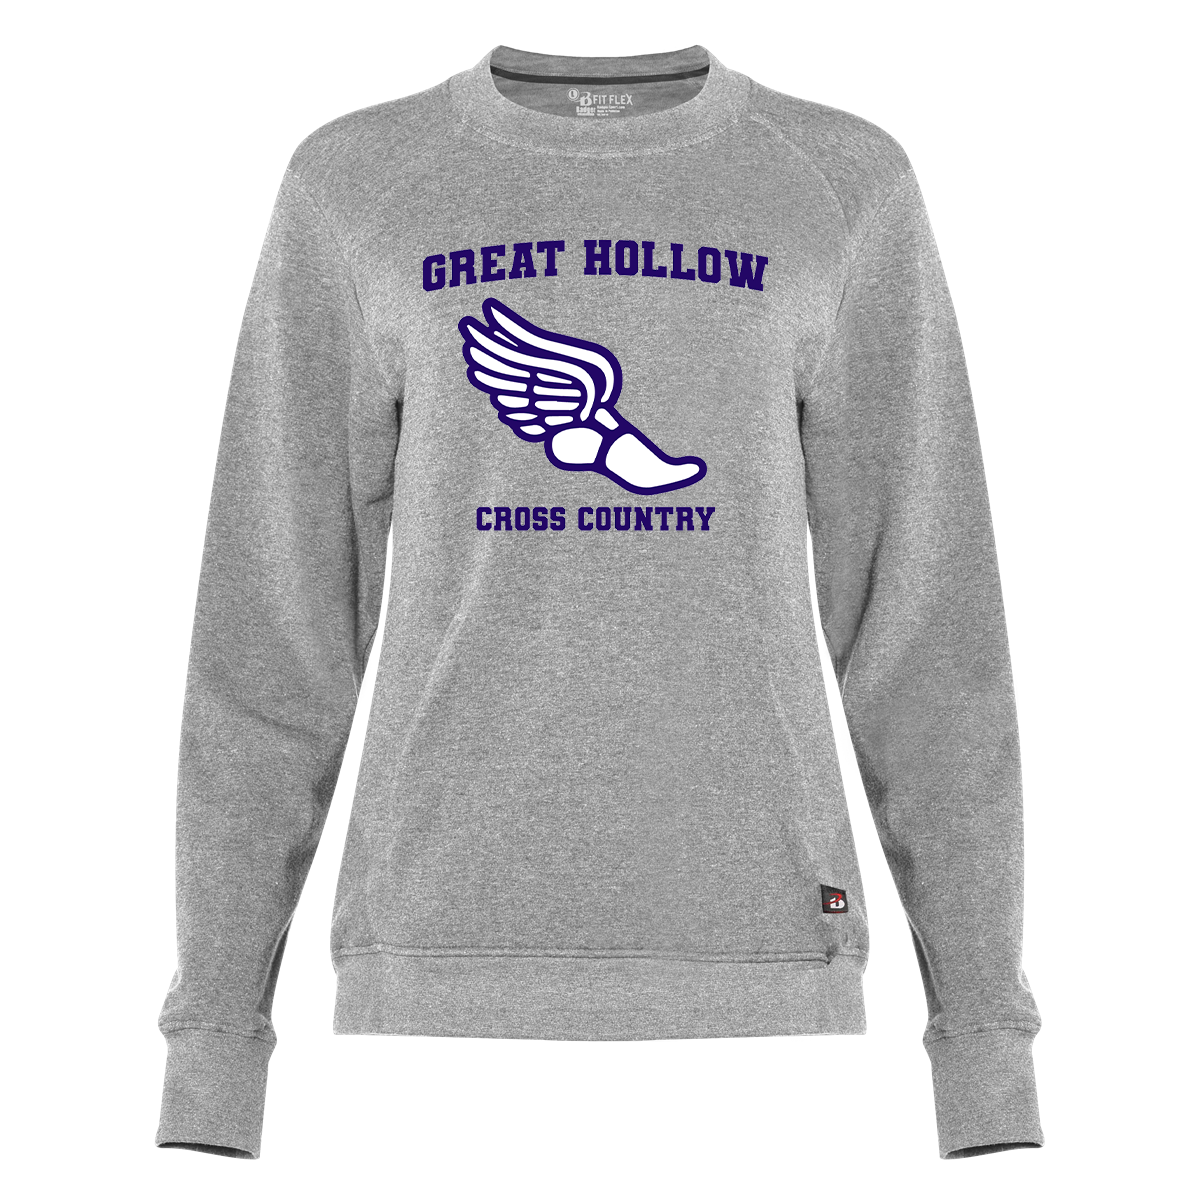 Great Hollow Cross Country Women's Pocket Crew